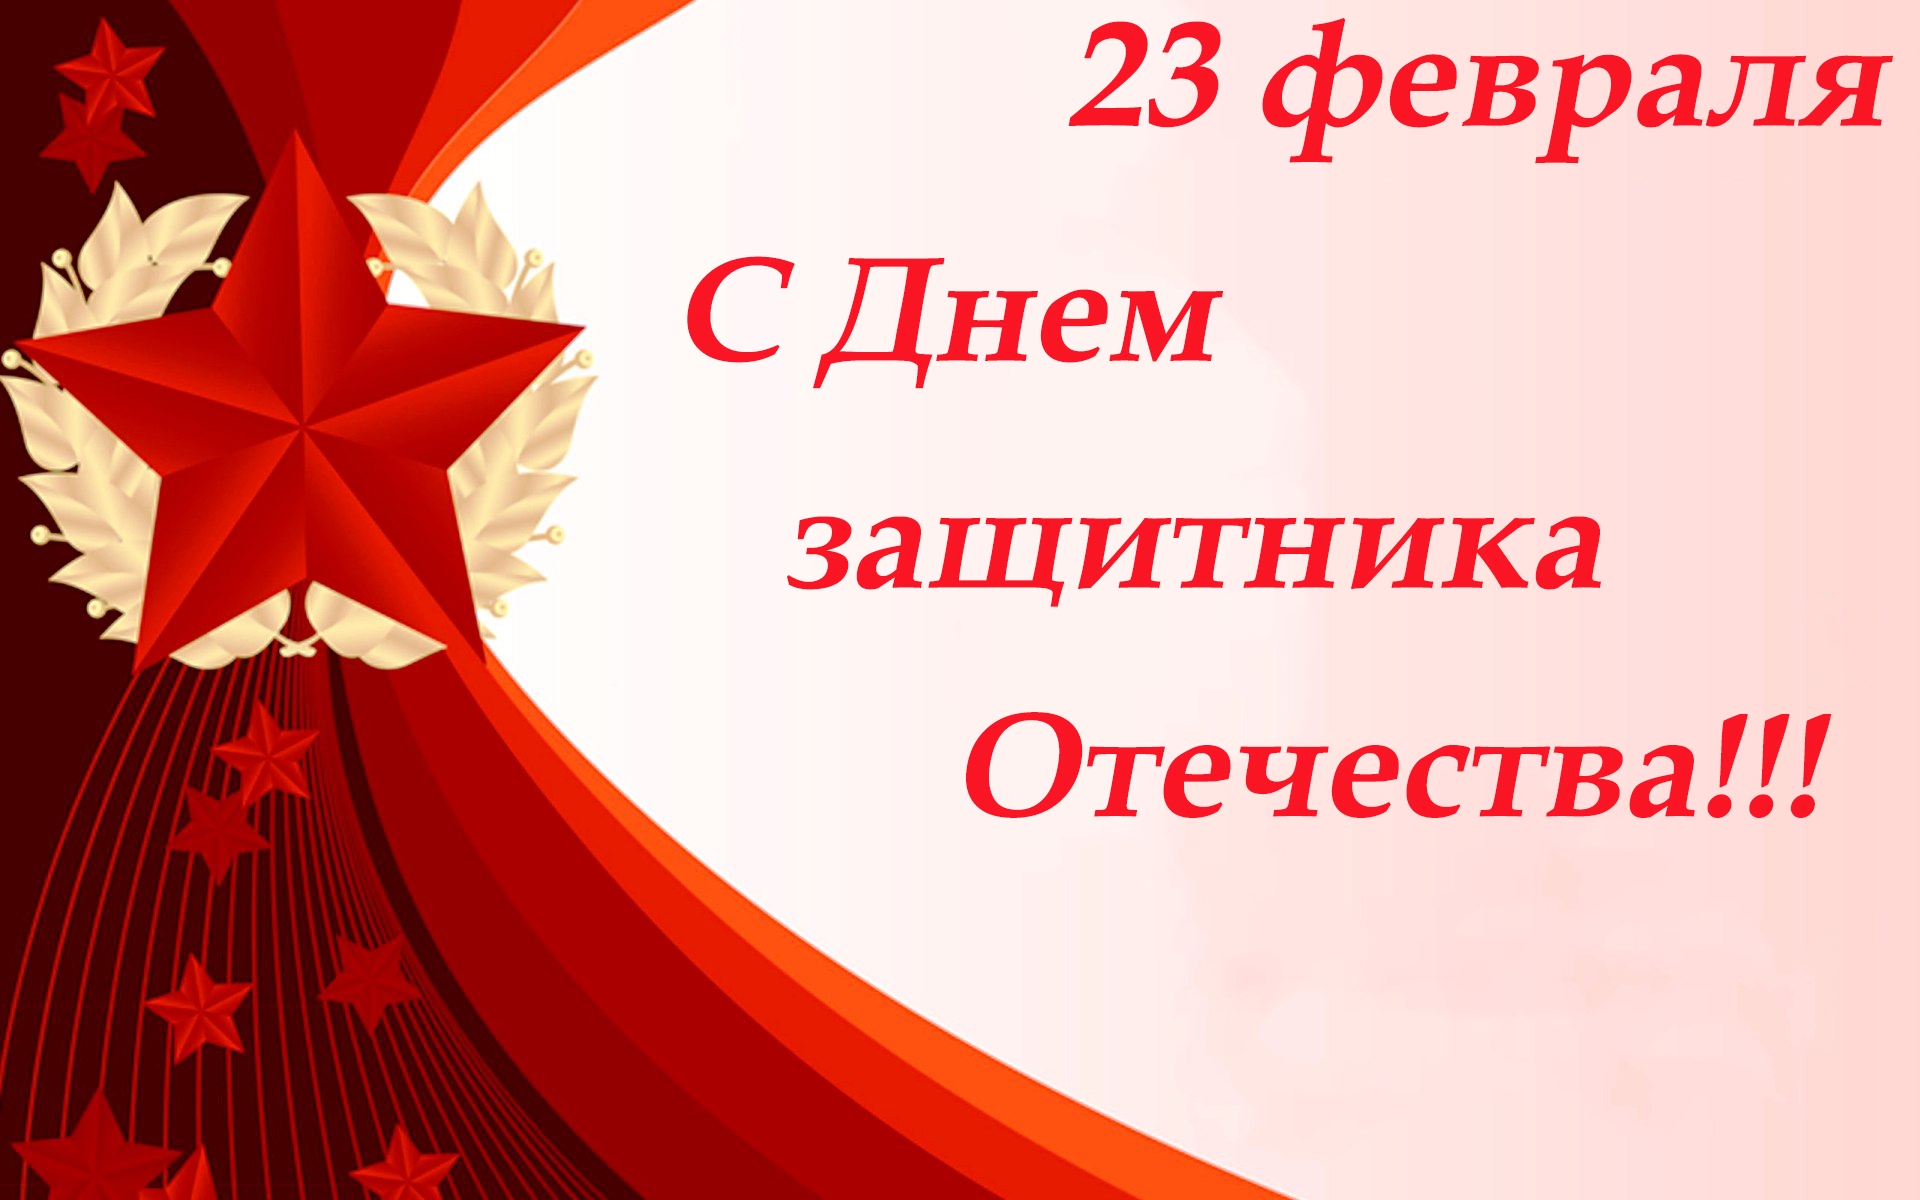 2018Holidays___Army_Congratulations_on_the_Day_of_the_Defender_of_the_Fatherland__February_23_postcard_with_a_red_star_123098_.jpg